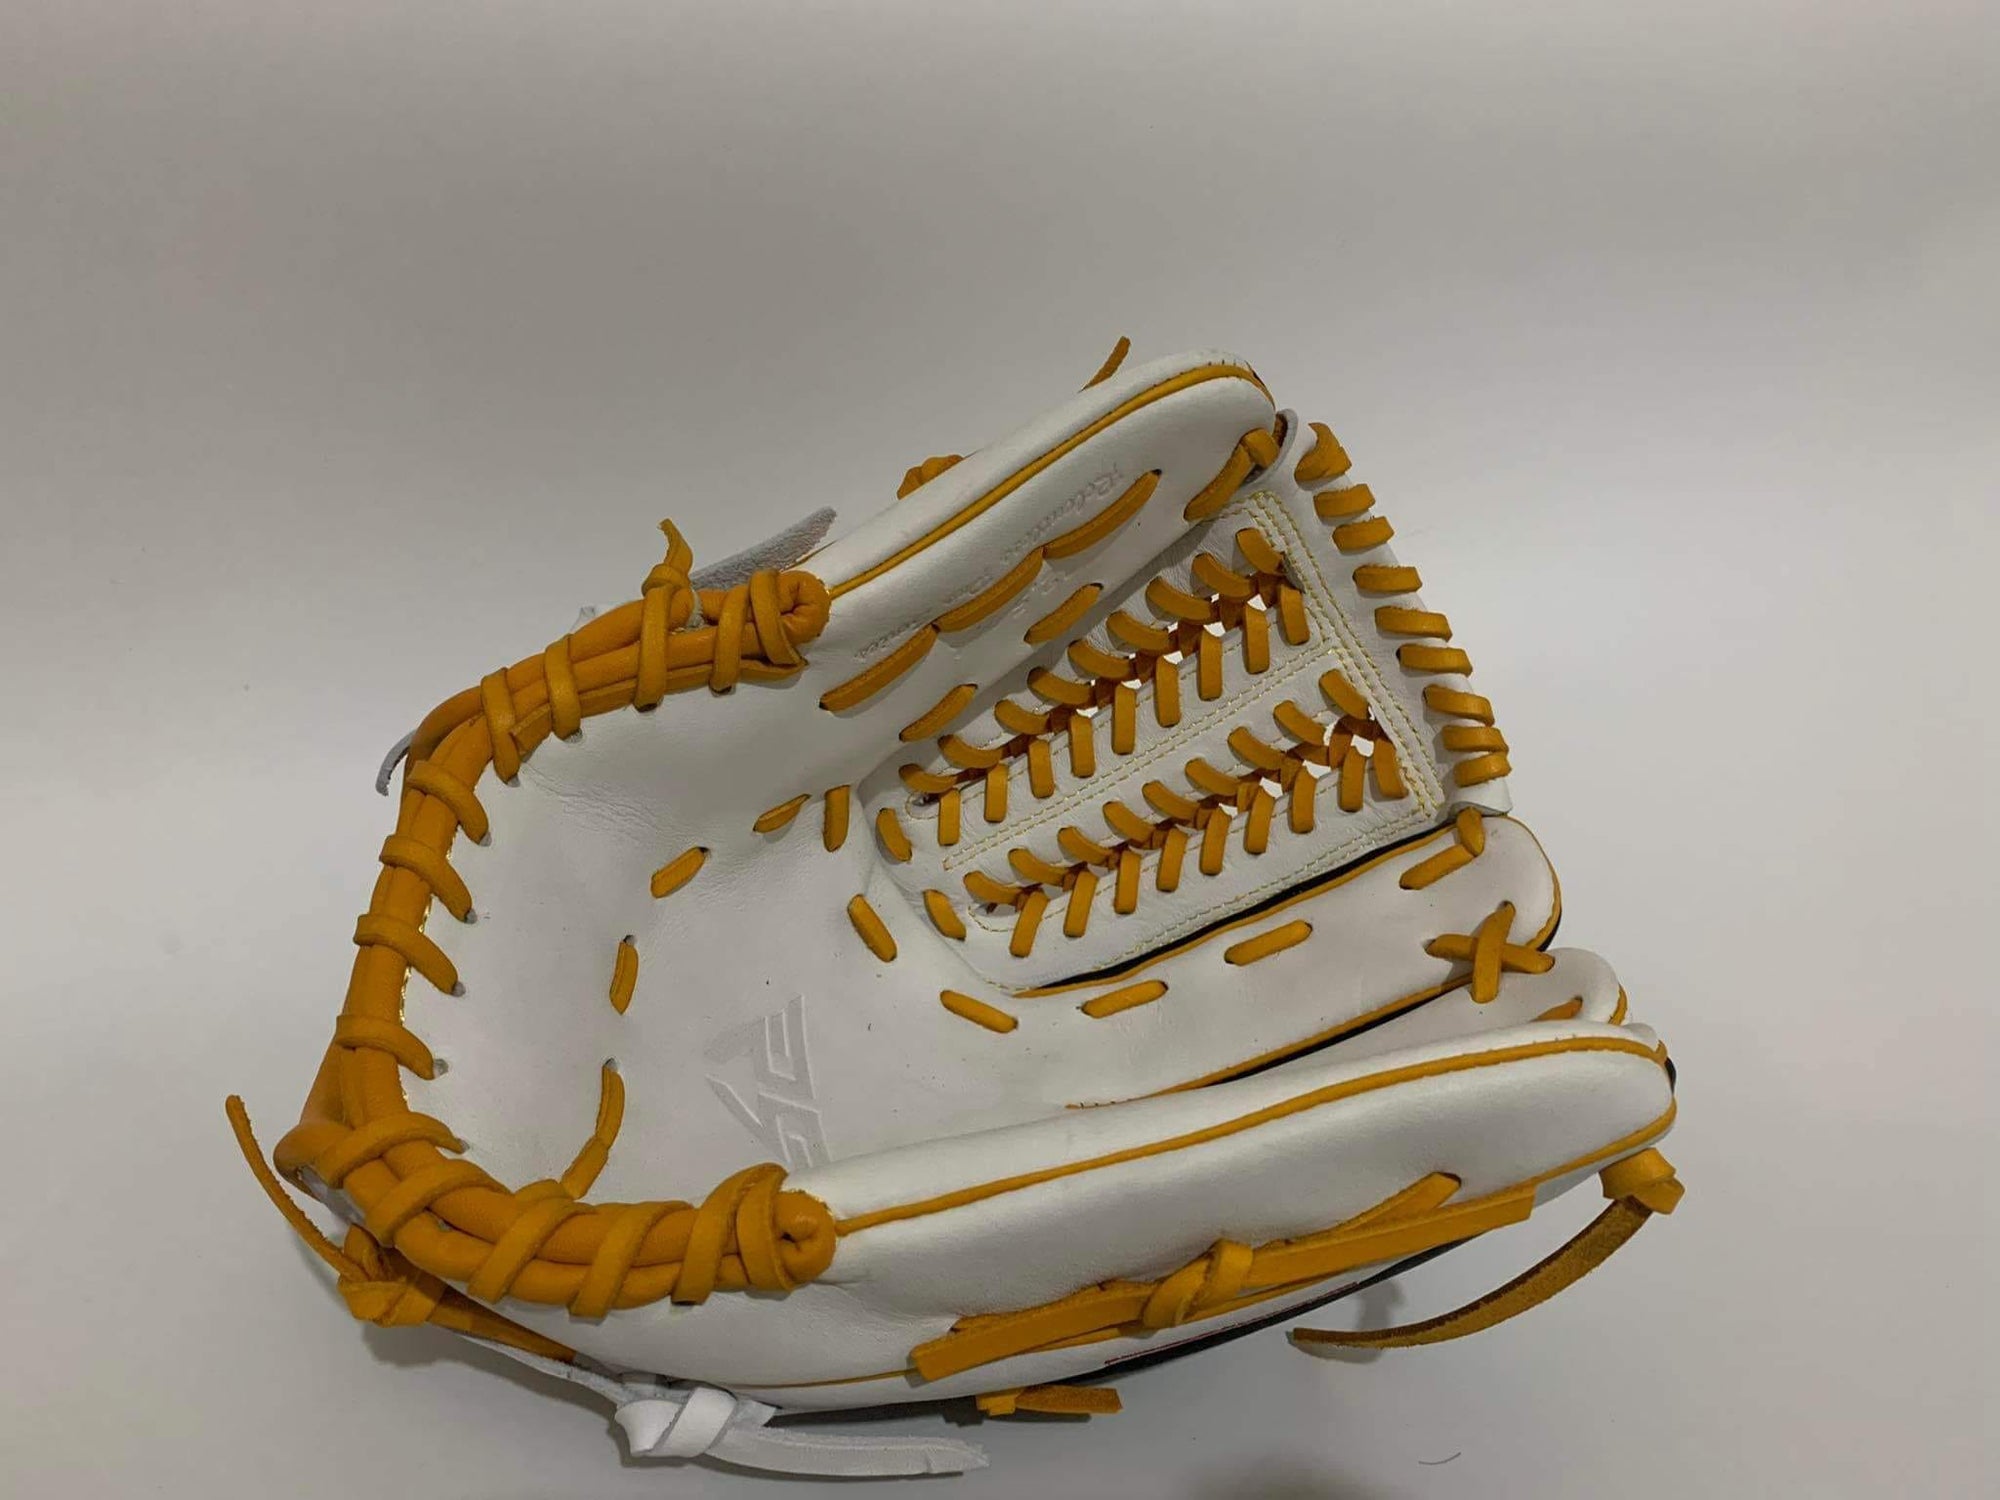 When To Choose Japanese Kip Leather For Your Ball Glove